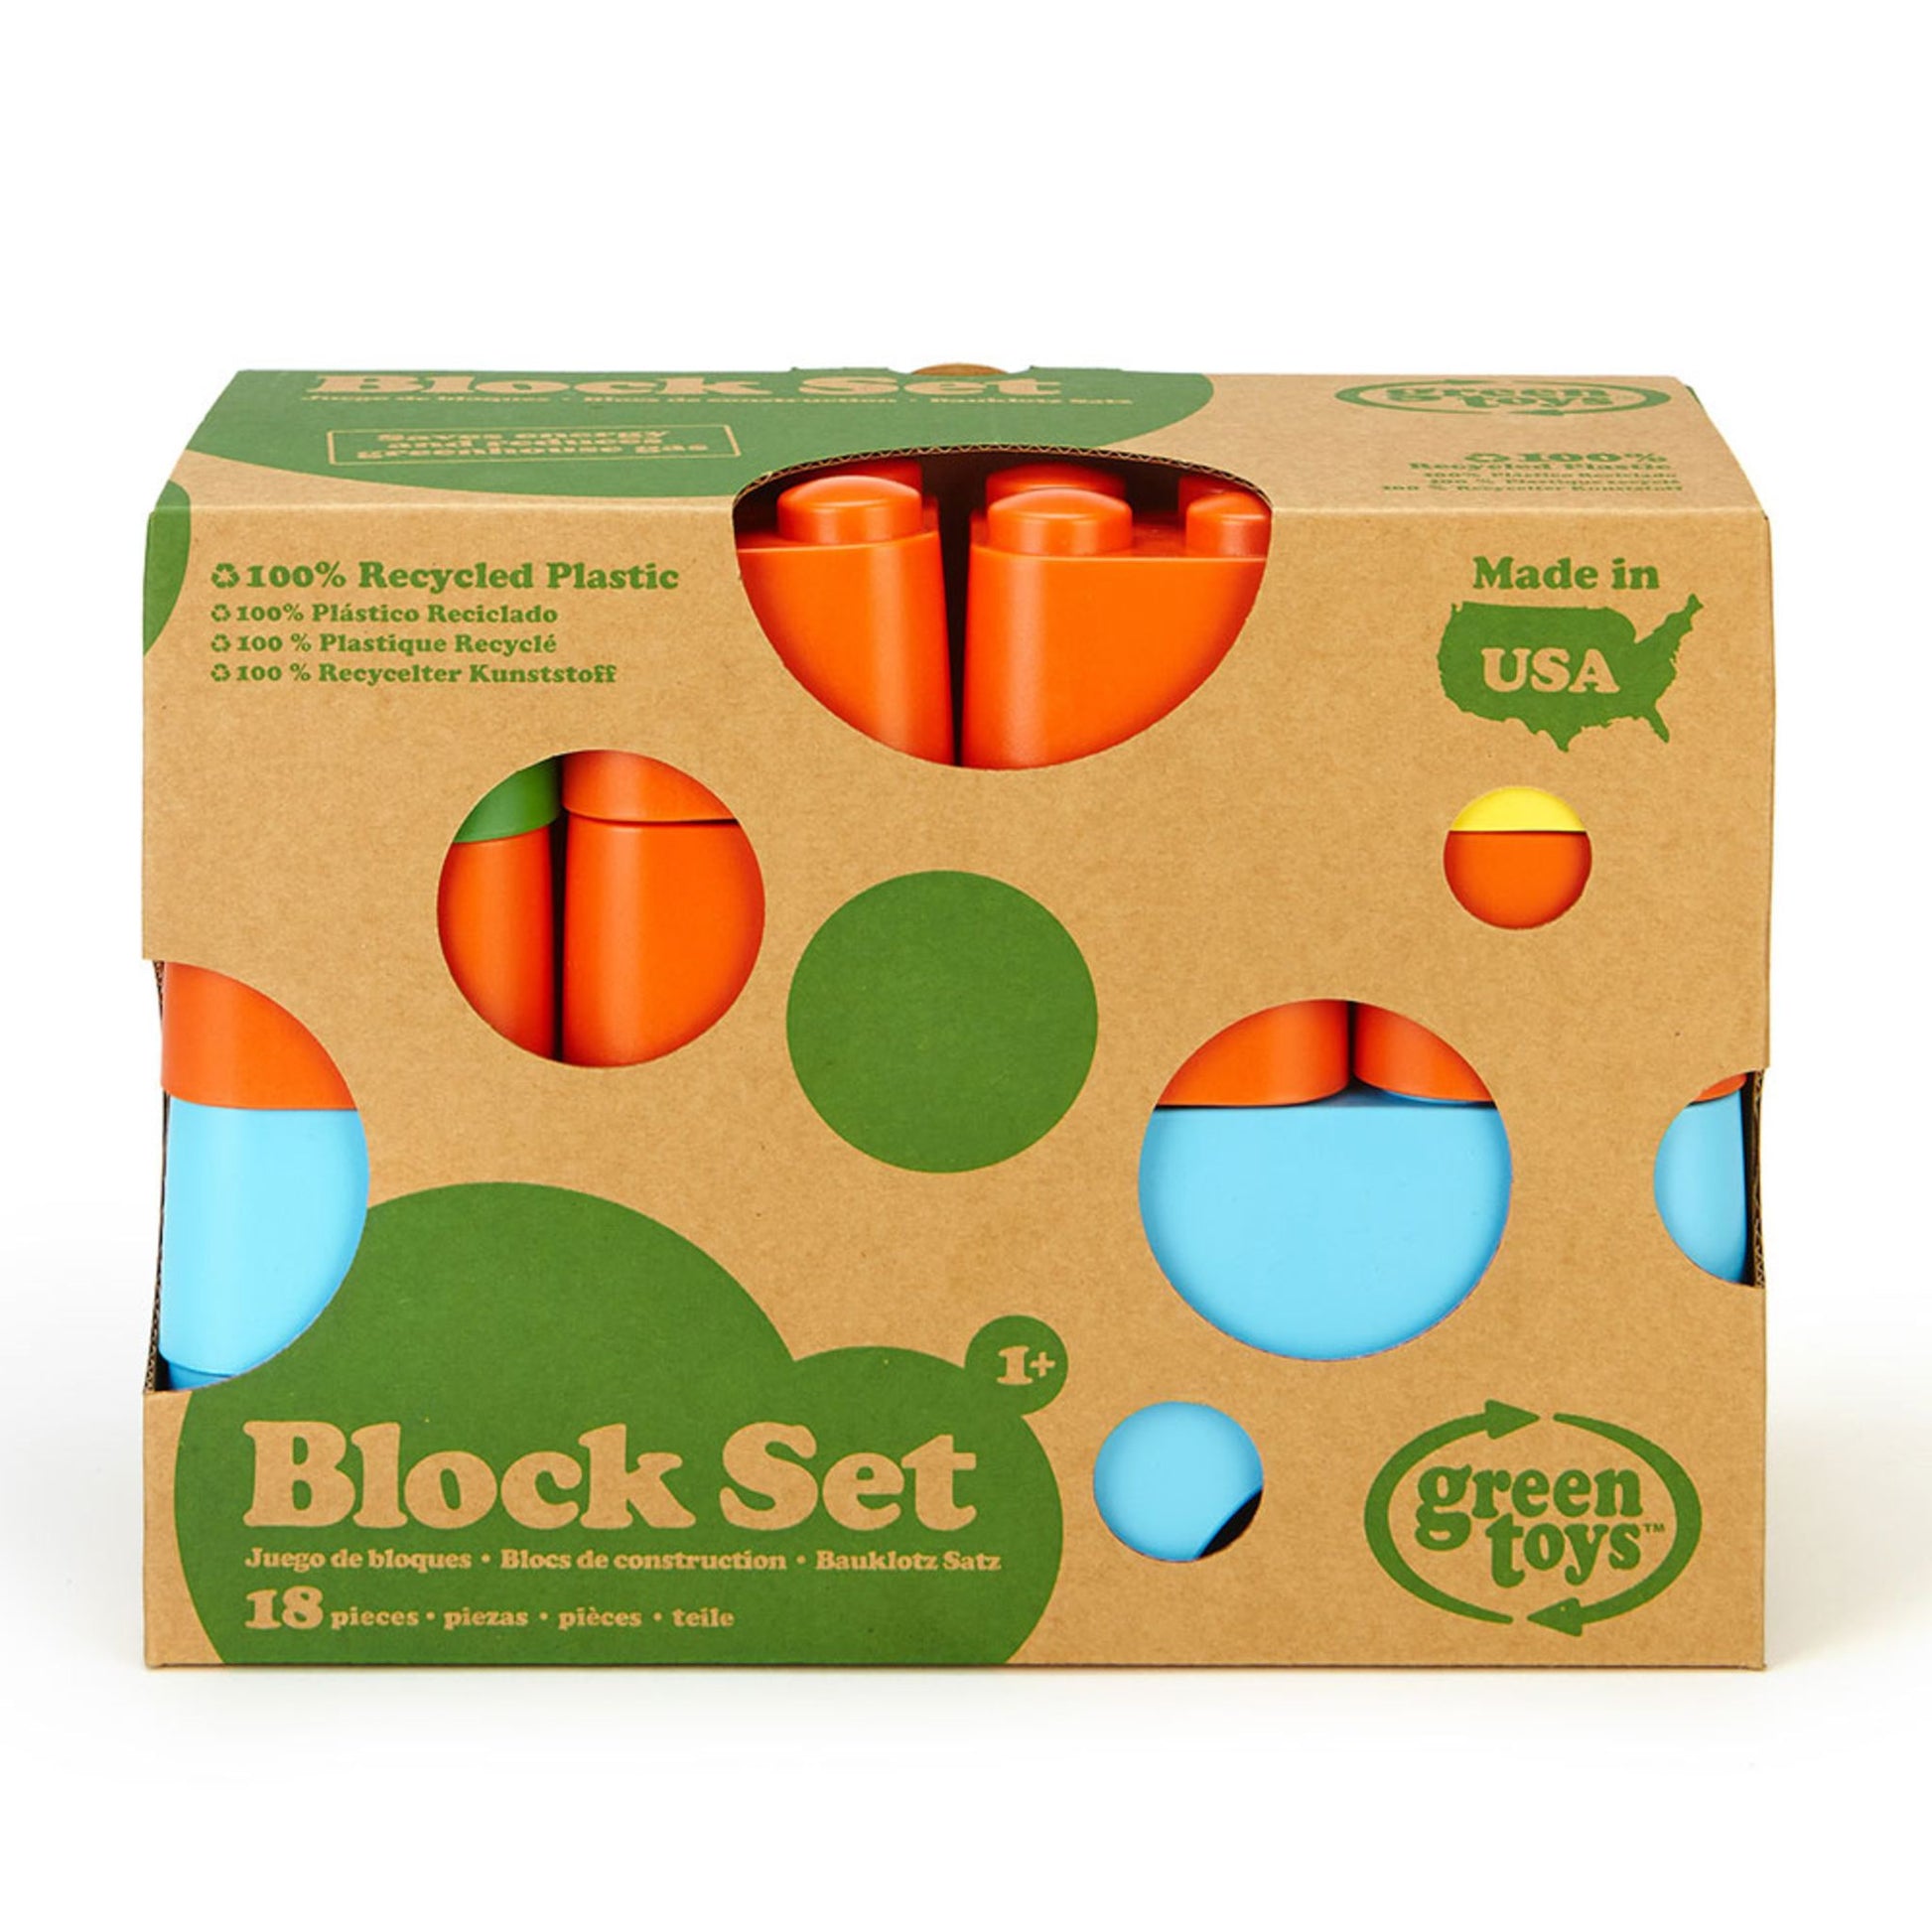 Green Toys Recycled Plastic Blocks - eco packaging